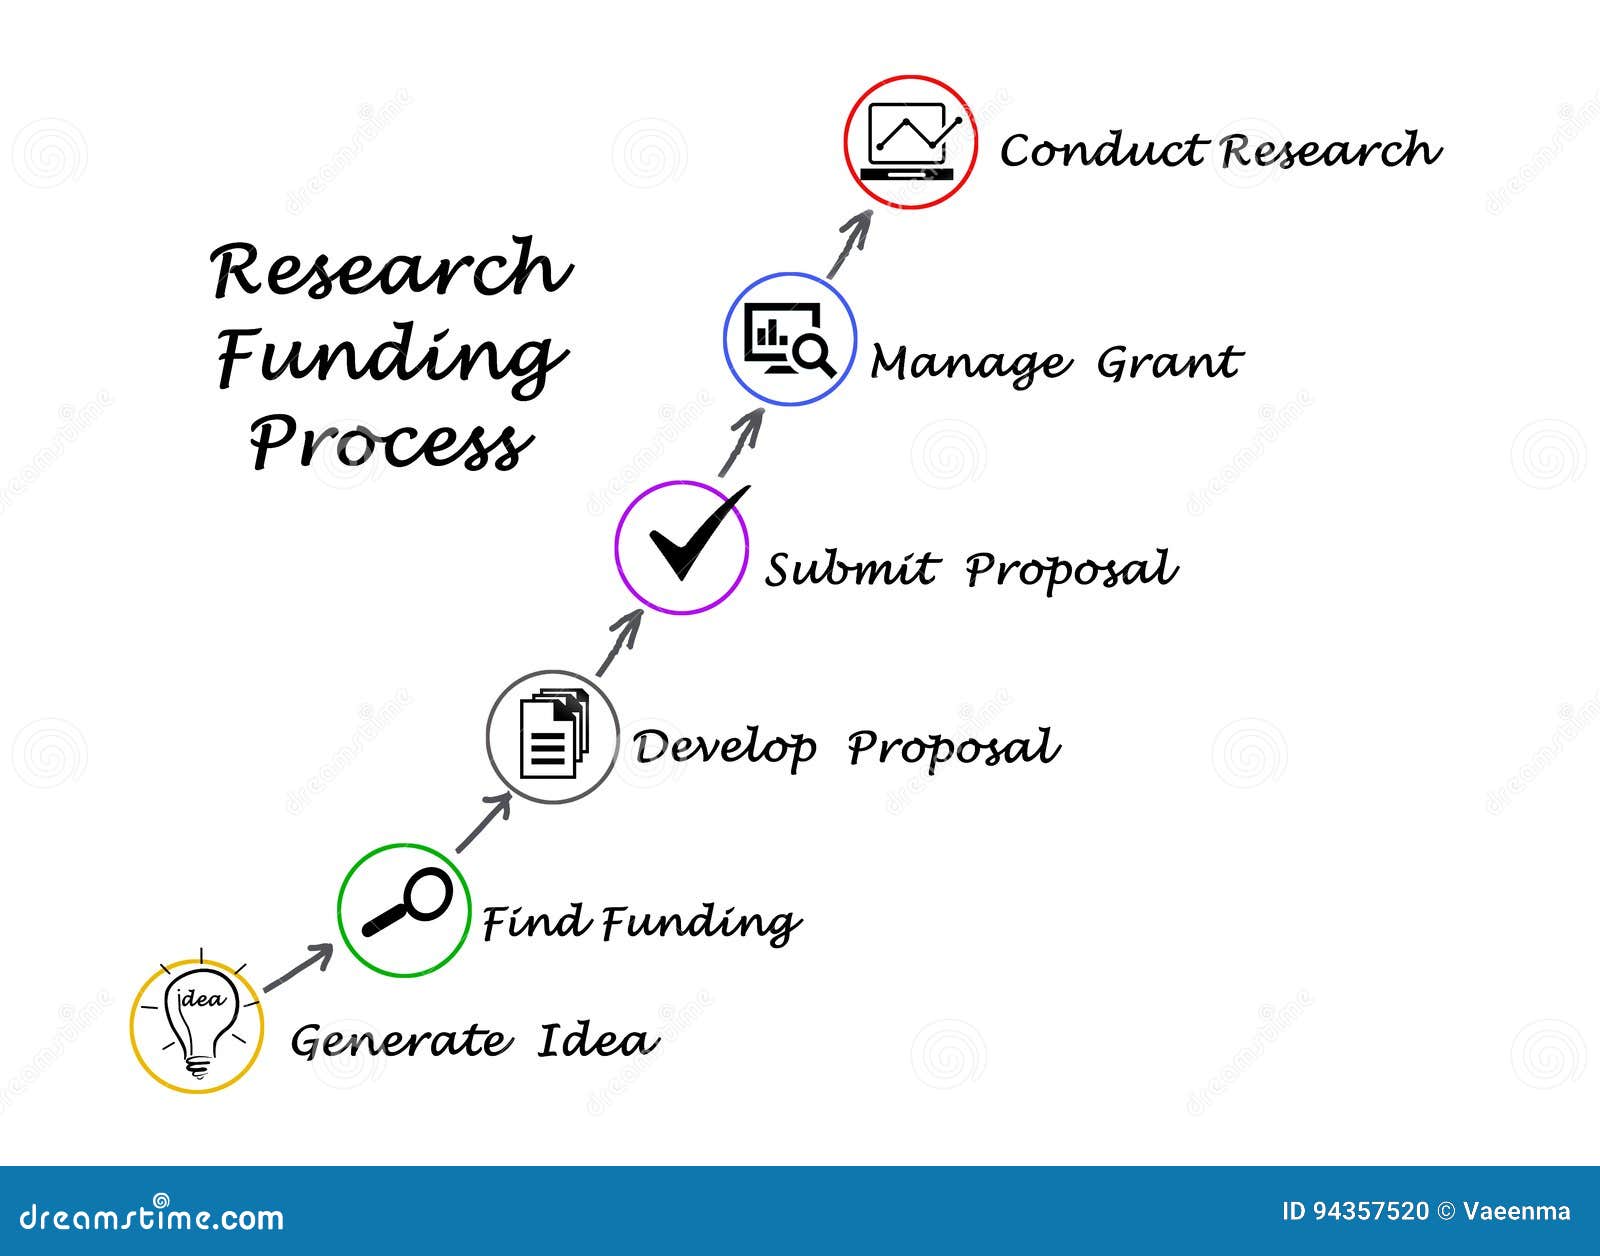 how does university research funding work